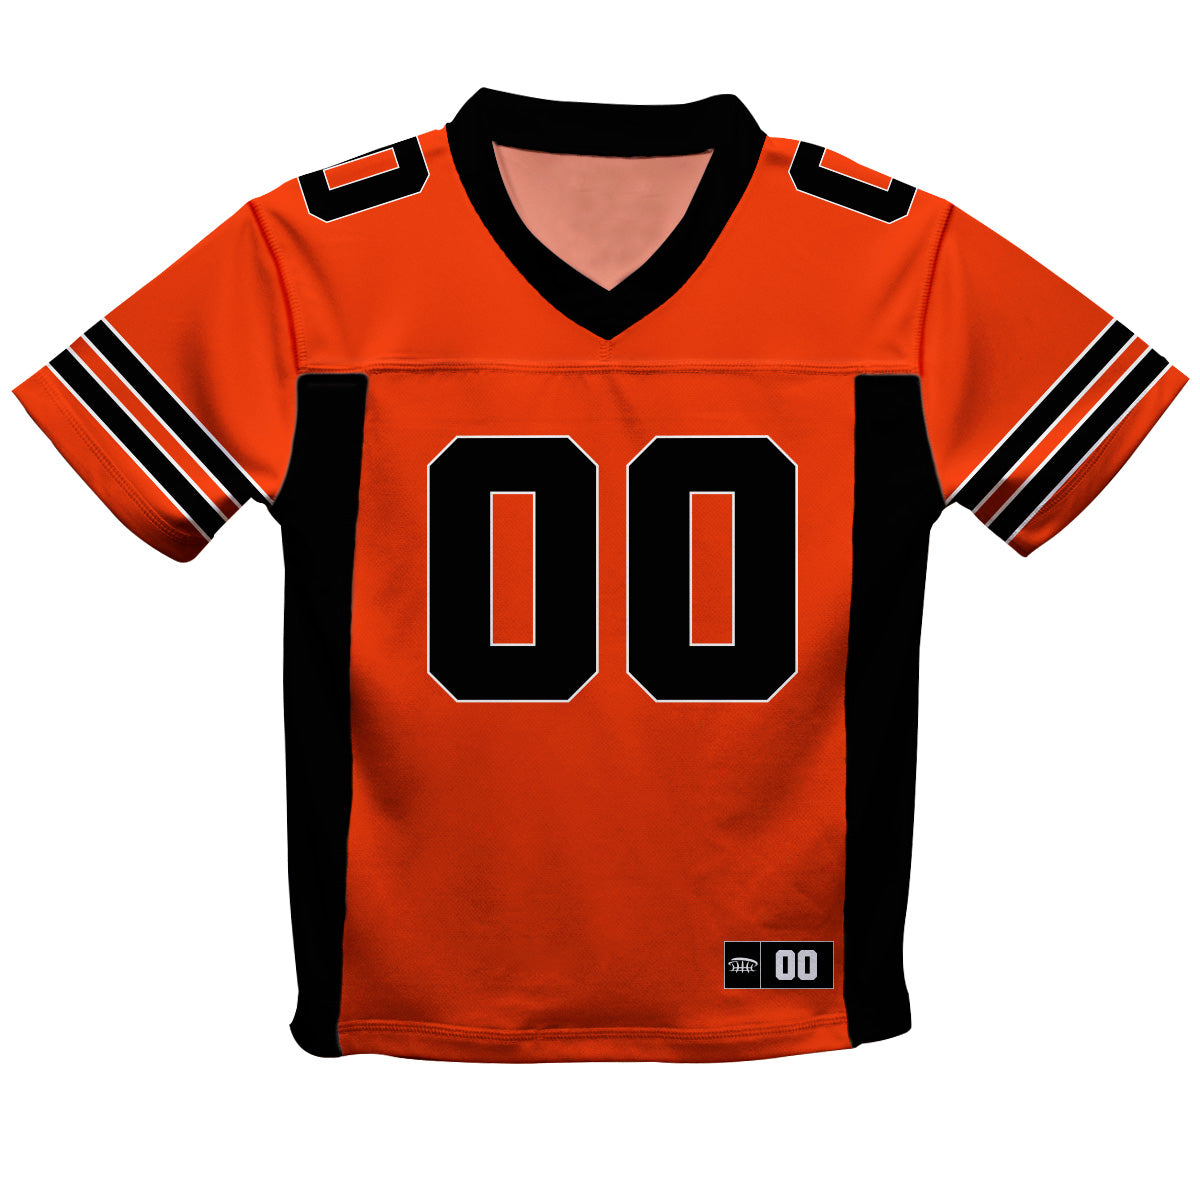 Personalized Name and Number Orange and Black Fashion Football T-Shirt